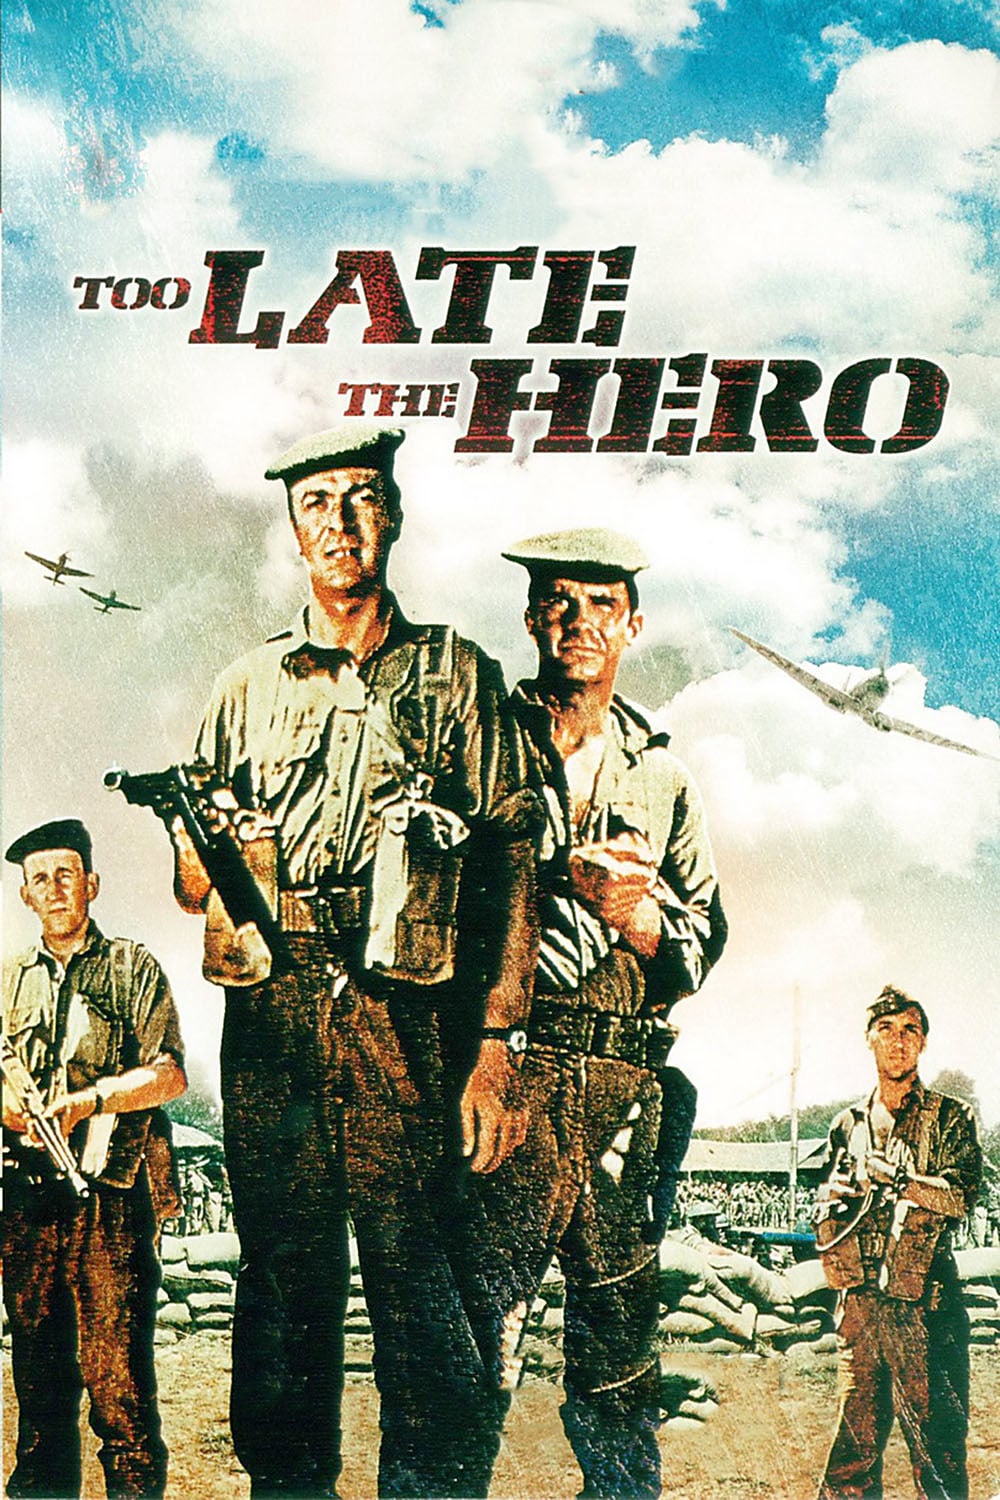 Poster for the movie "Too Late the Hero"